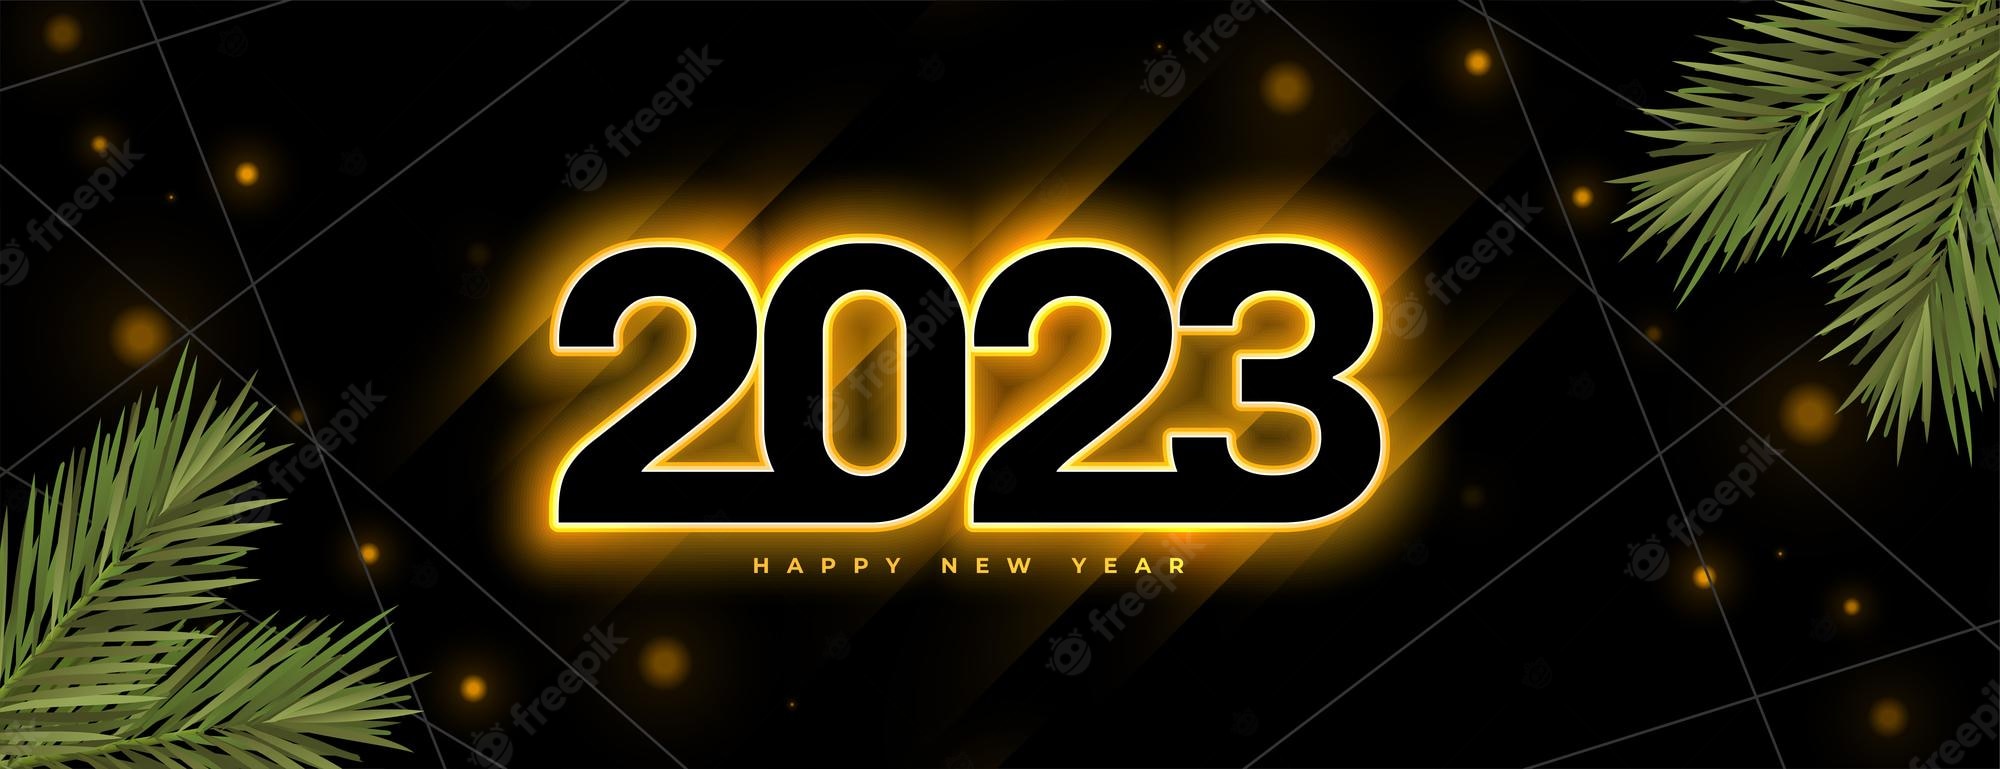 Free Vector. Happy new year wallpaper with glowing 2023 text